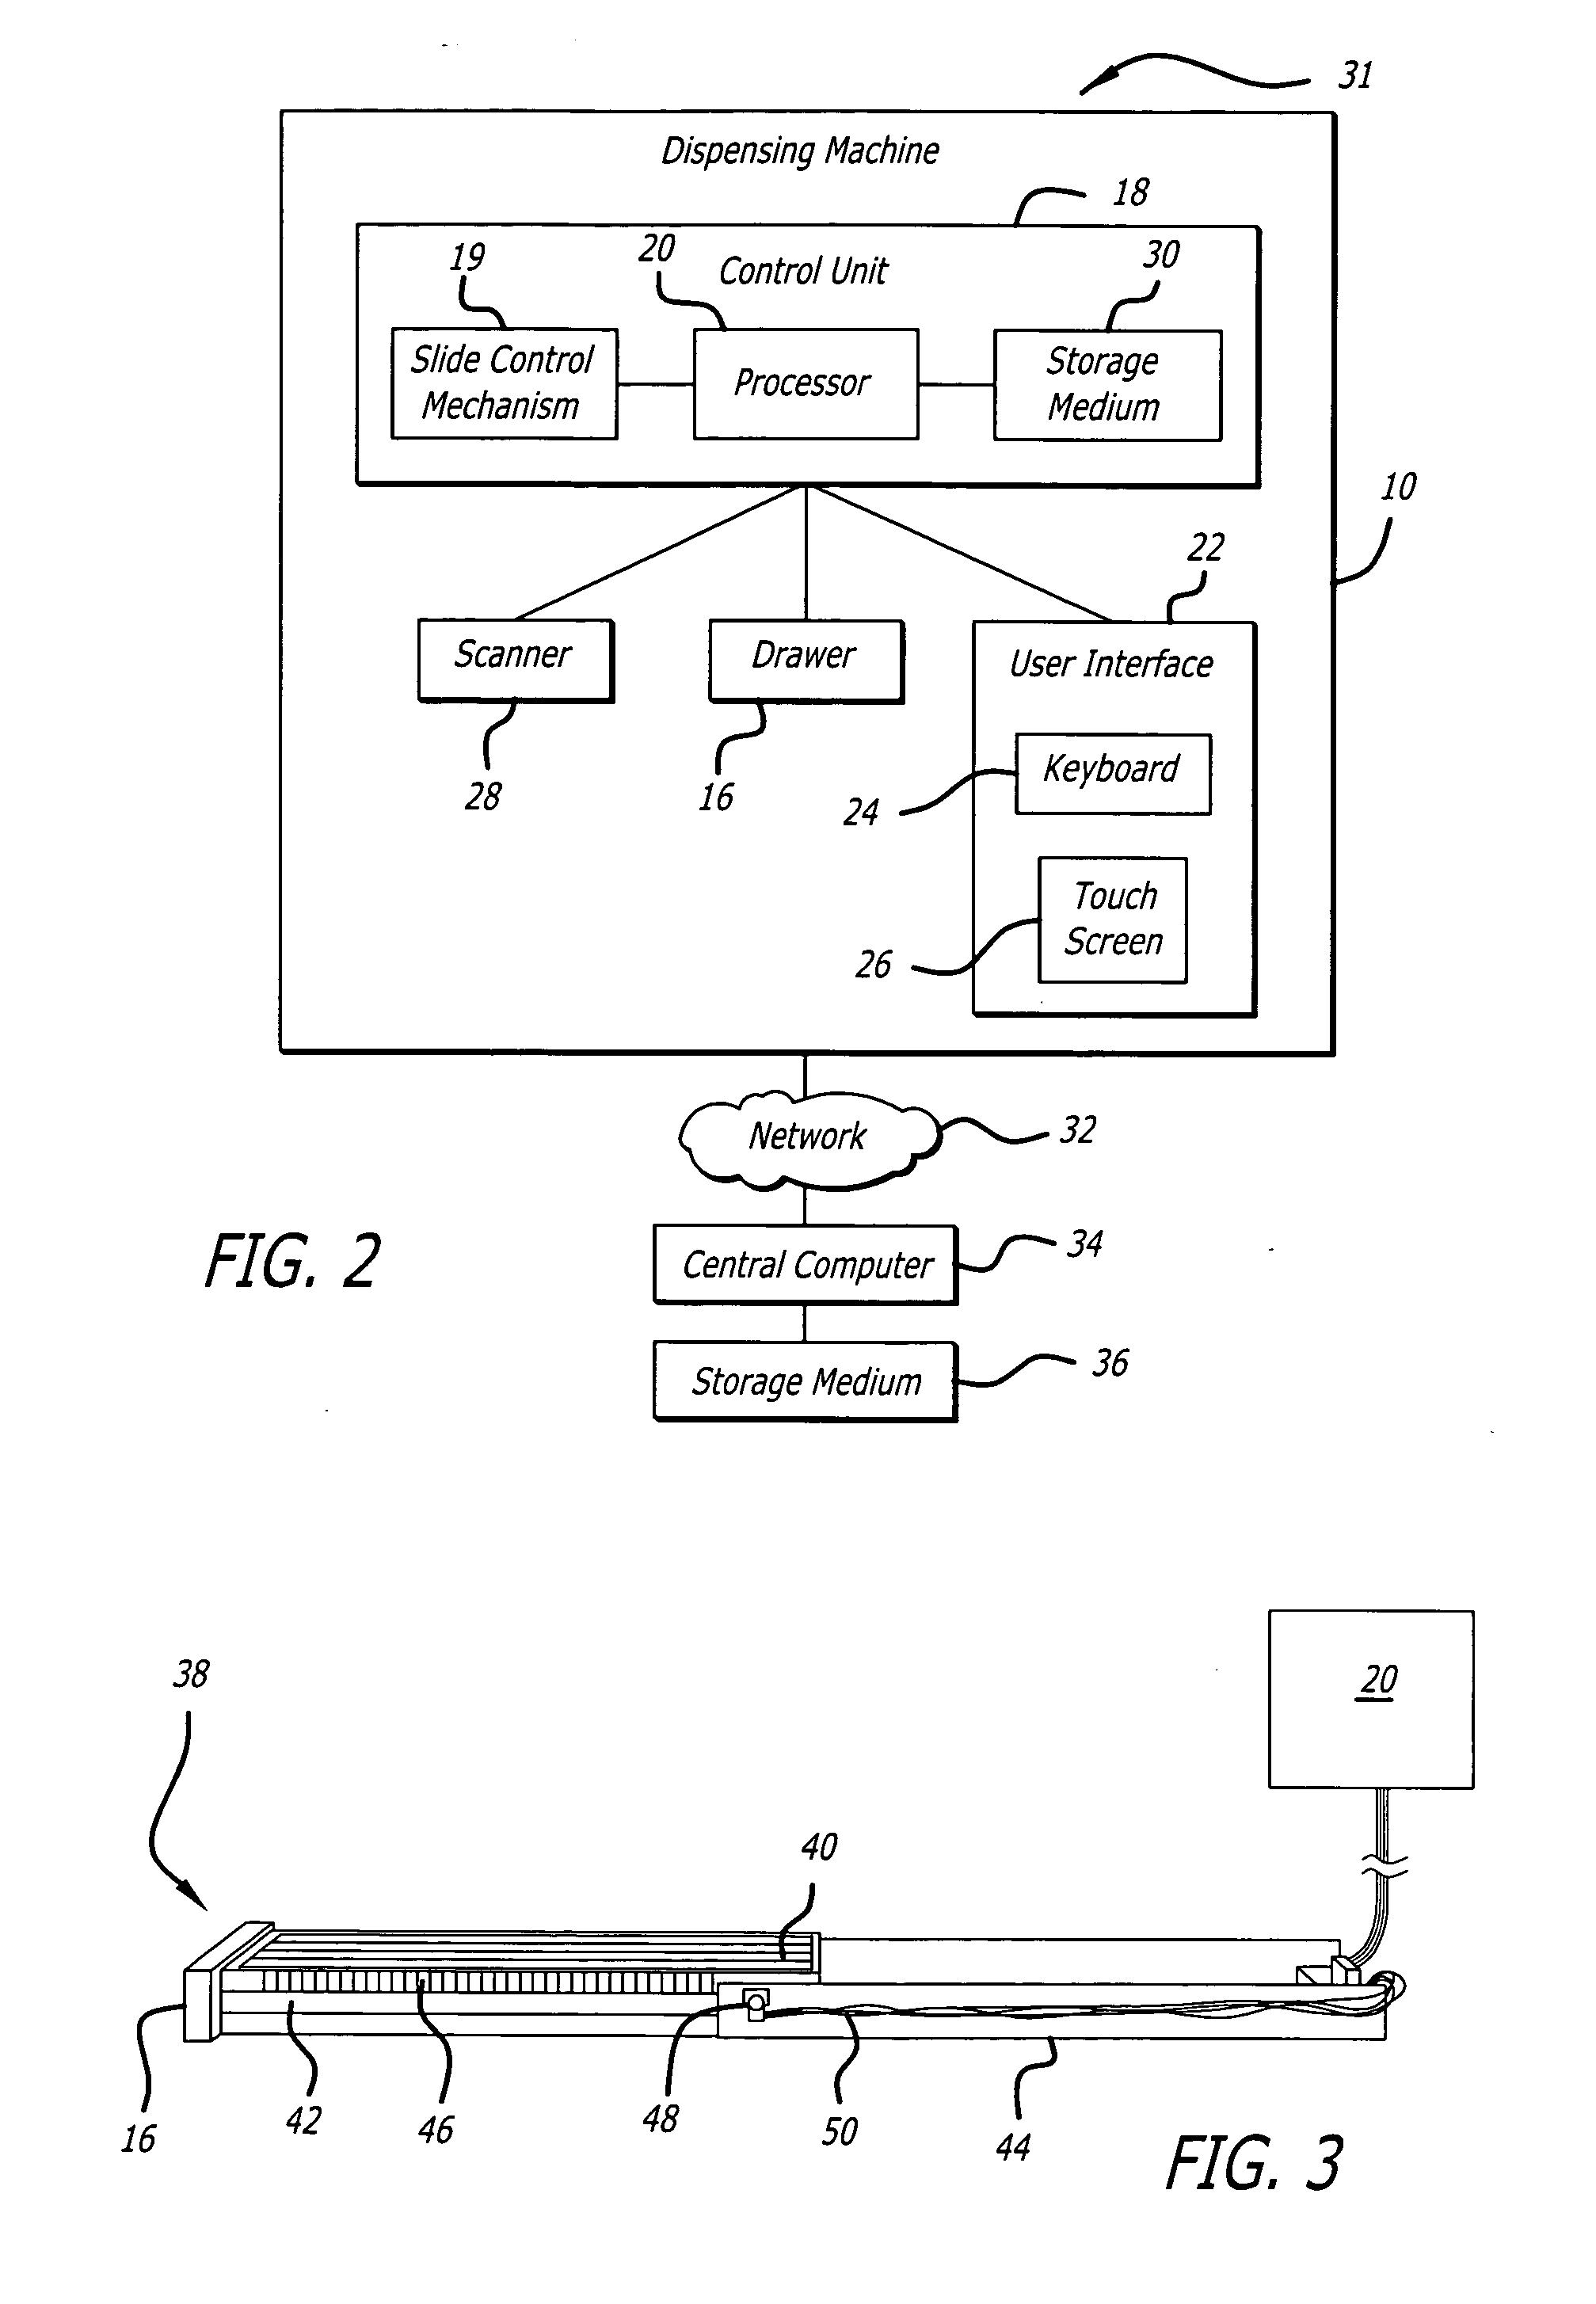 System and method for storing items and tracking item usage